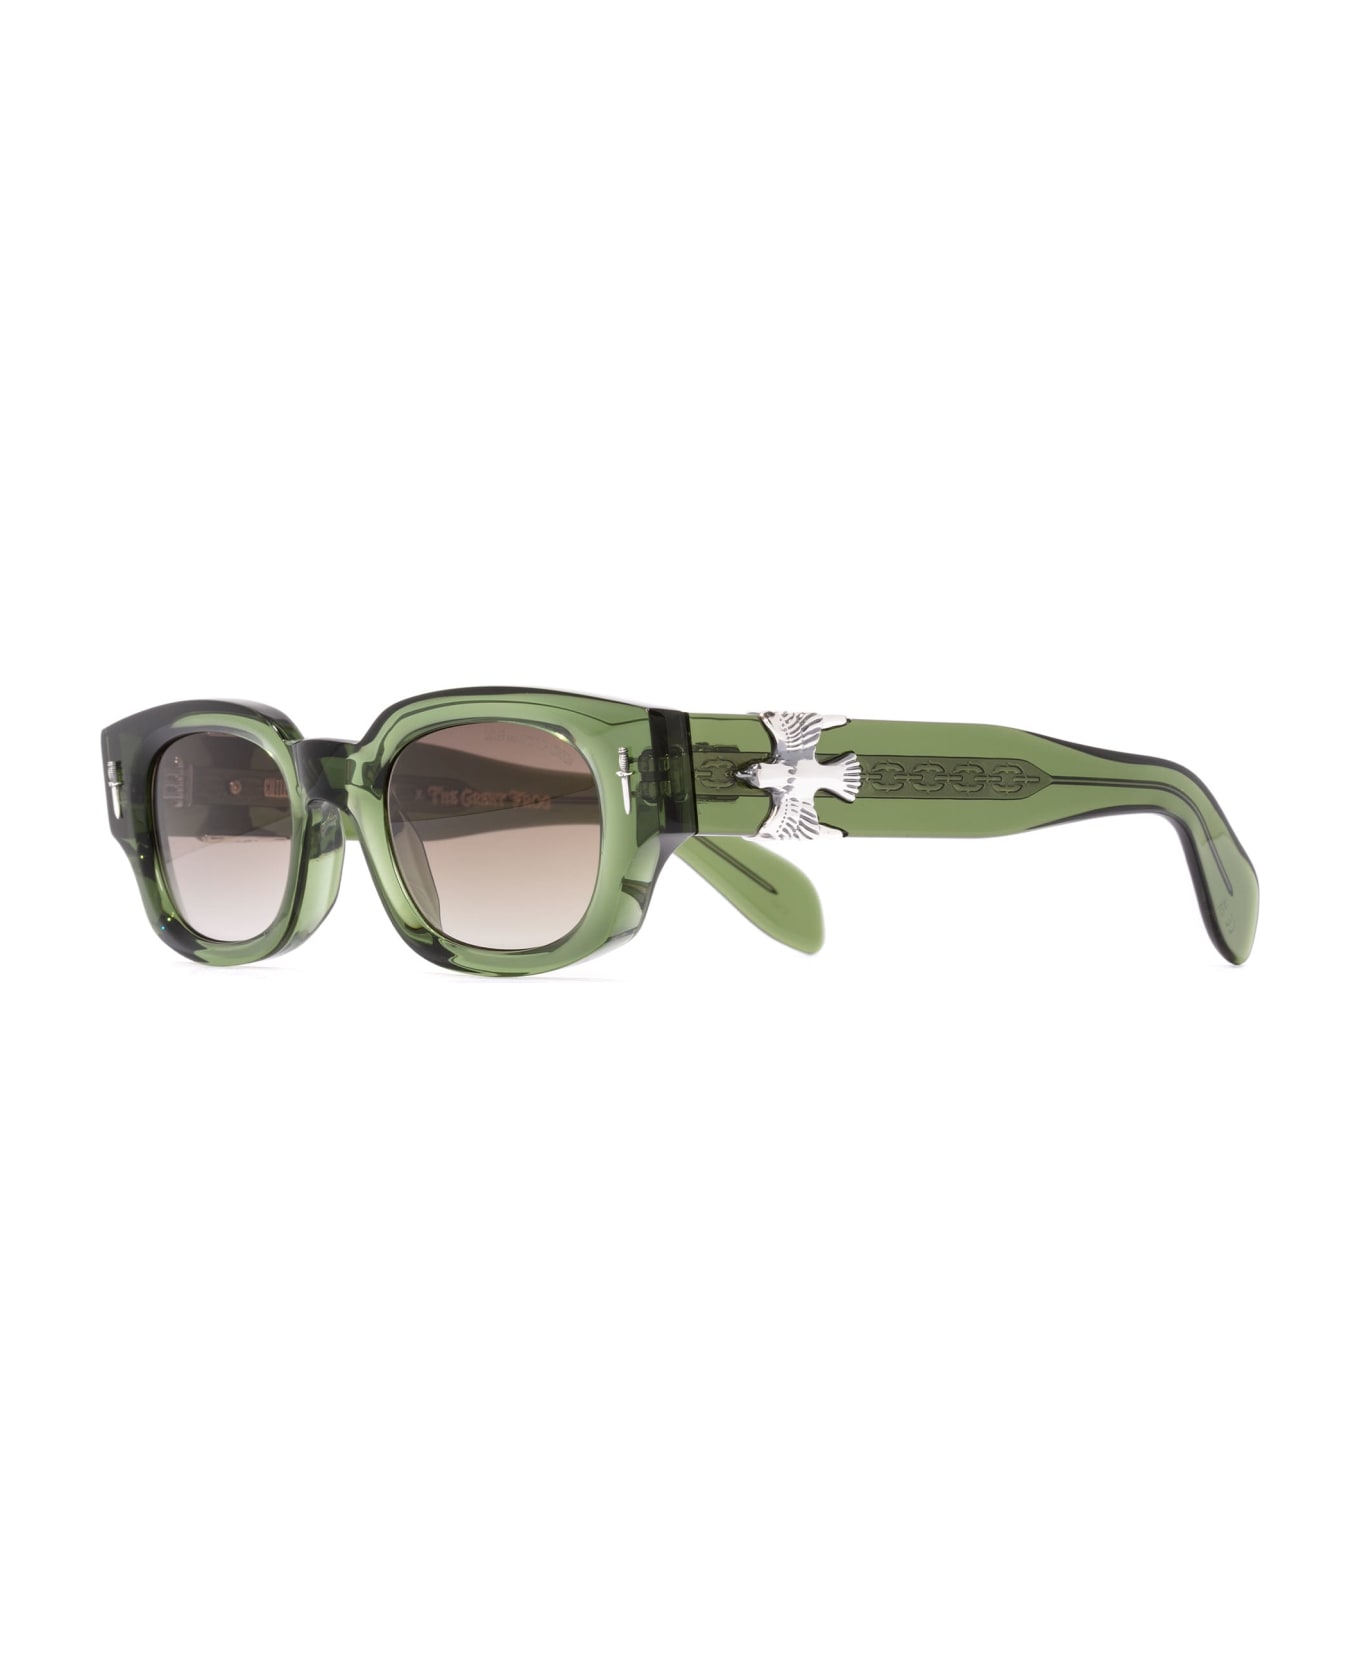 Cutler and Gross The Great Frog - Soaring Eagle / Leaf Green Sunglasses - green サングラス